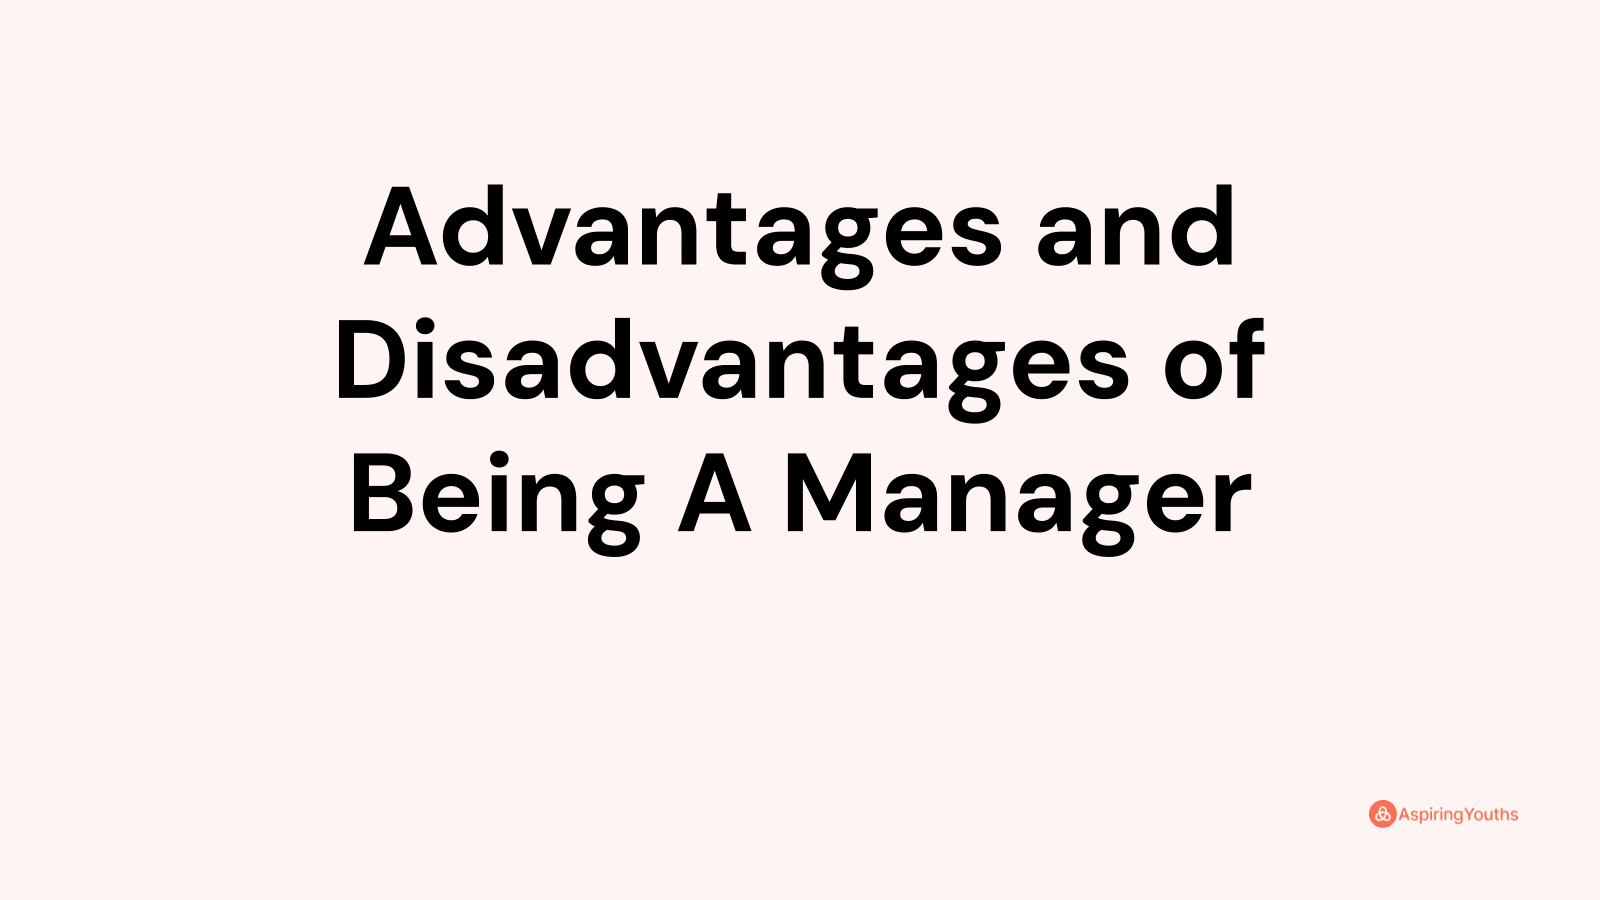 Advantages and disadvantages of Being A Manager